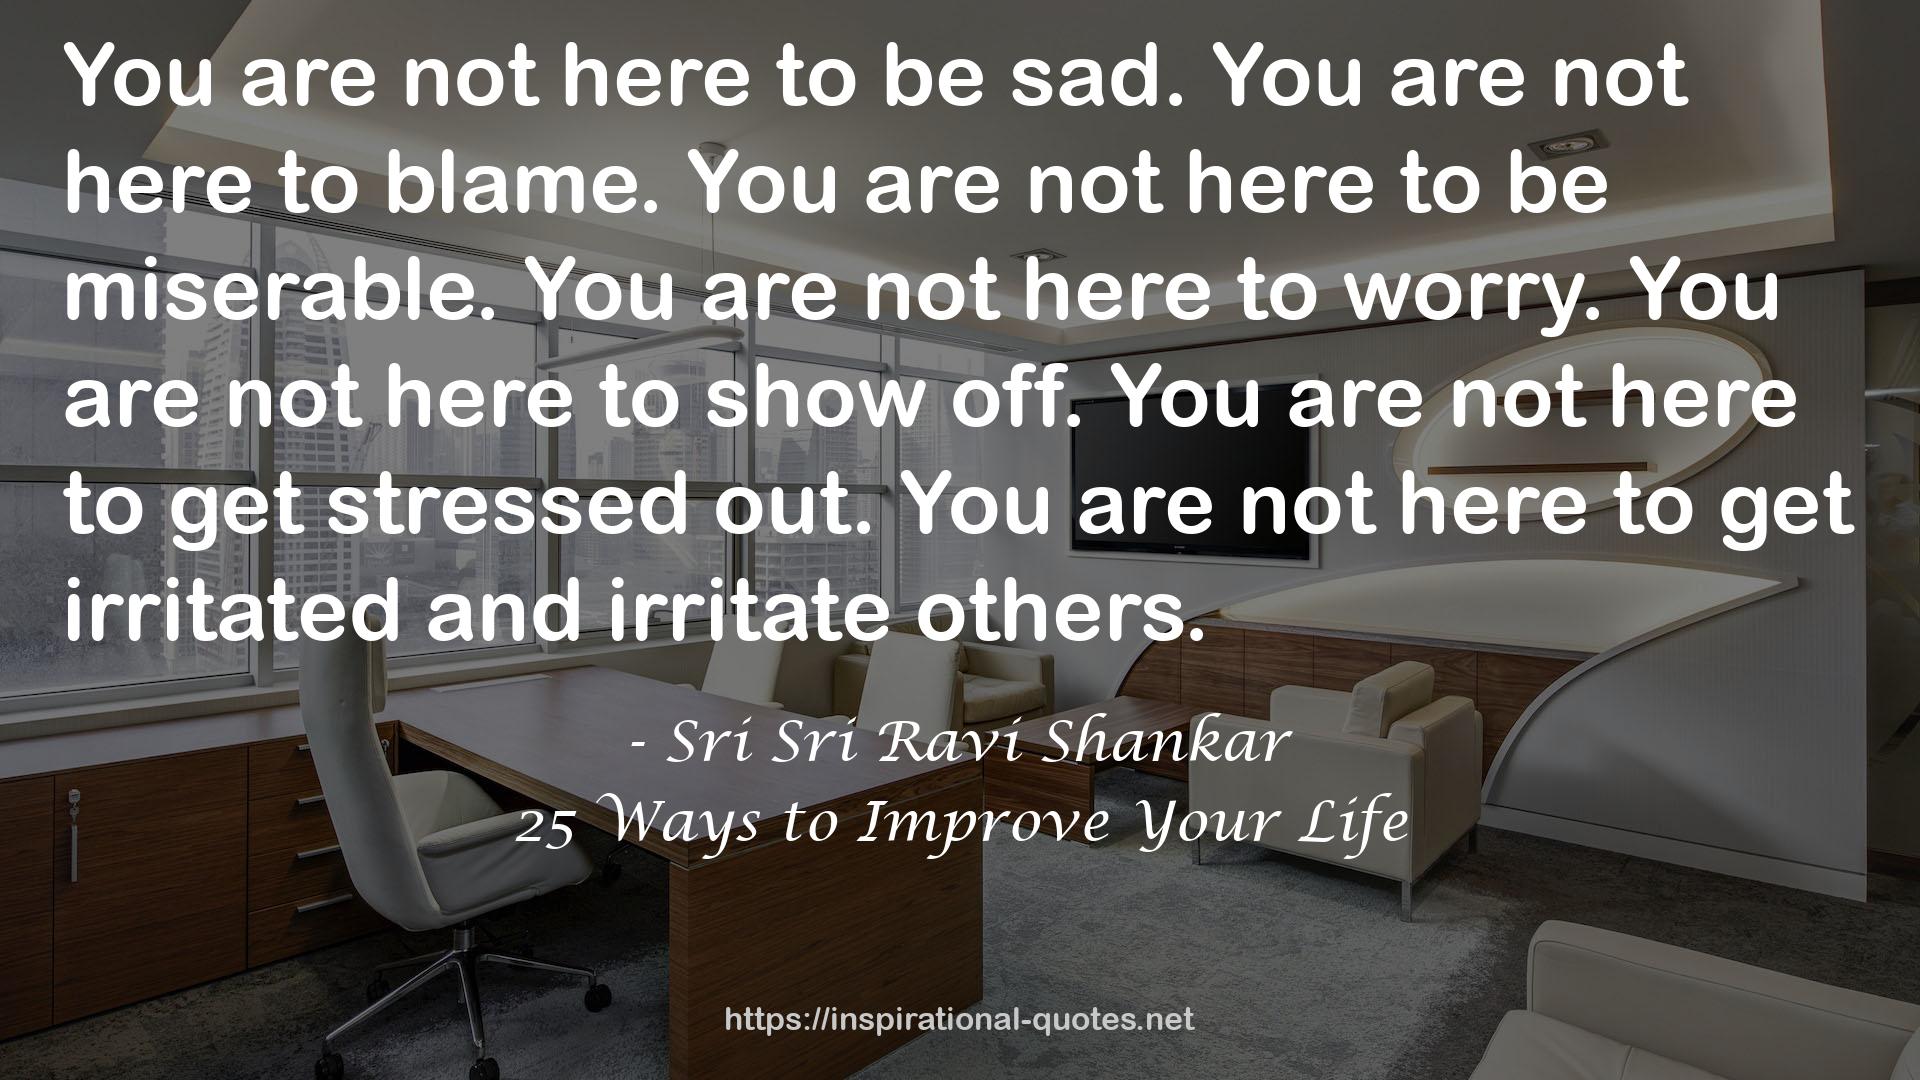 25 Ways to Improve Your Life QUOTES